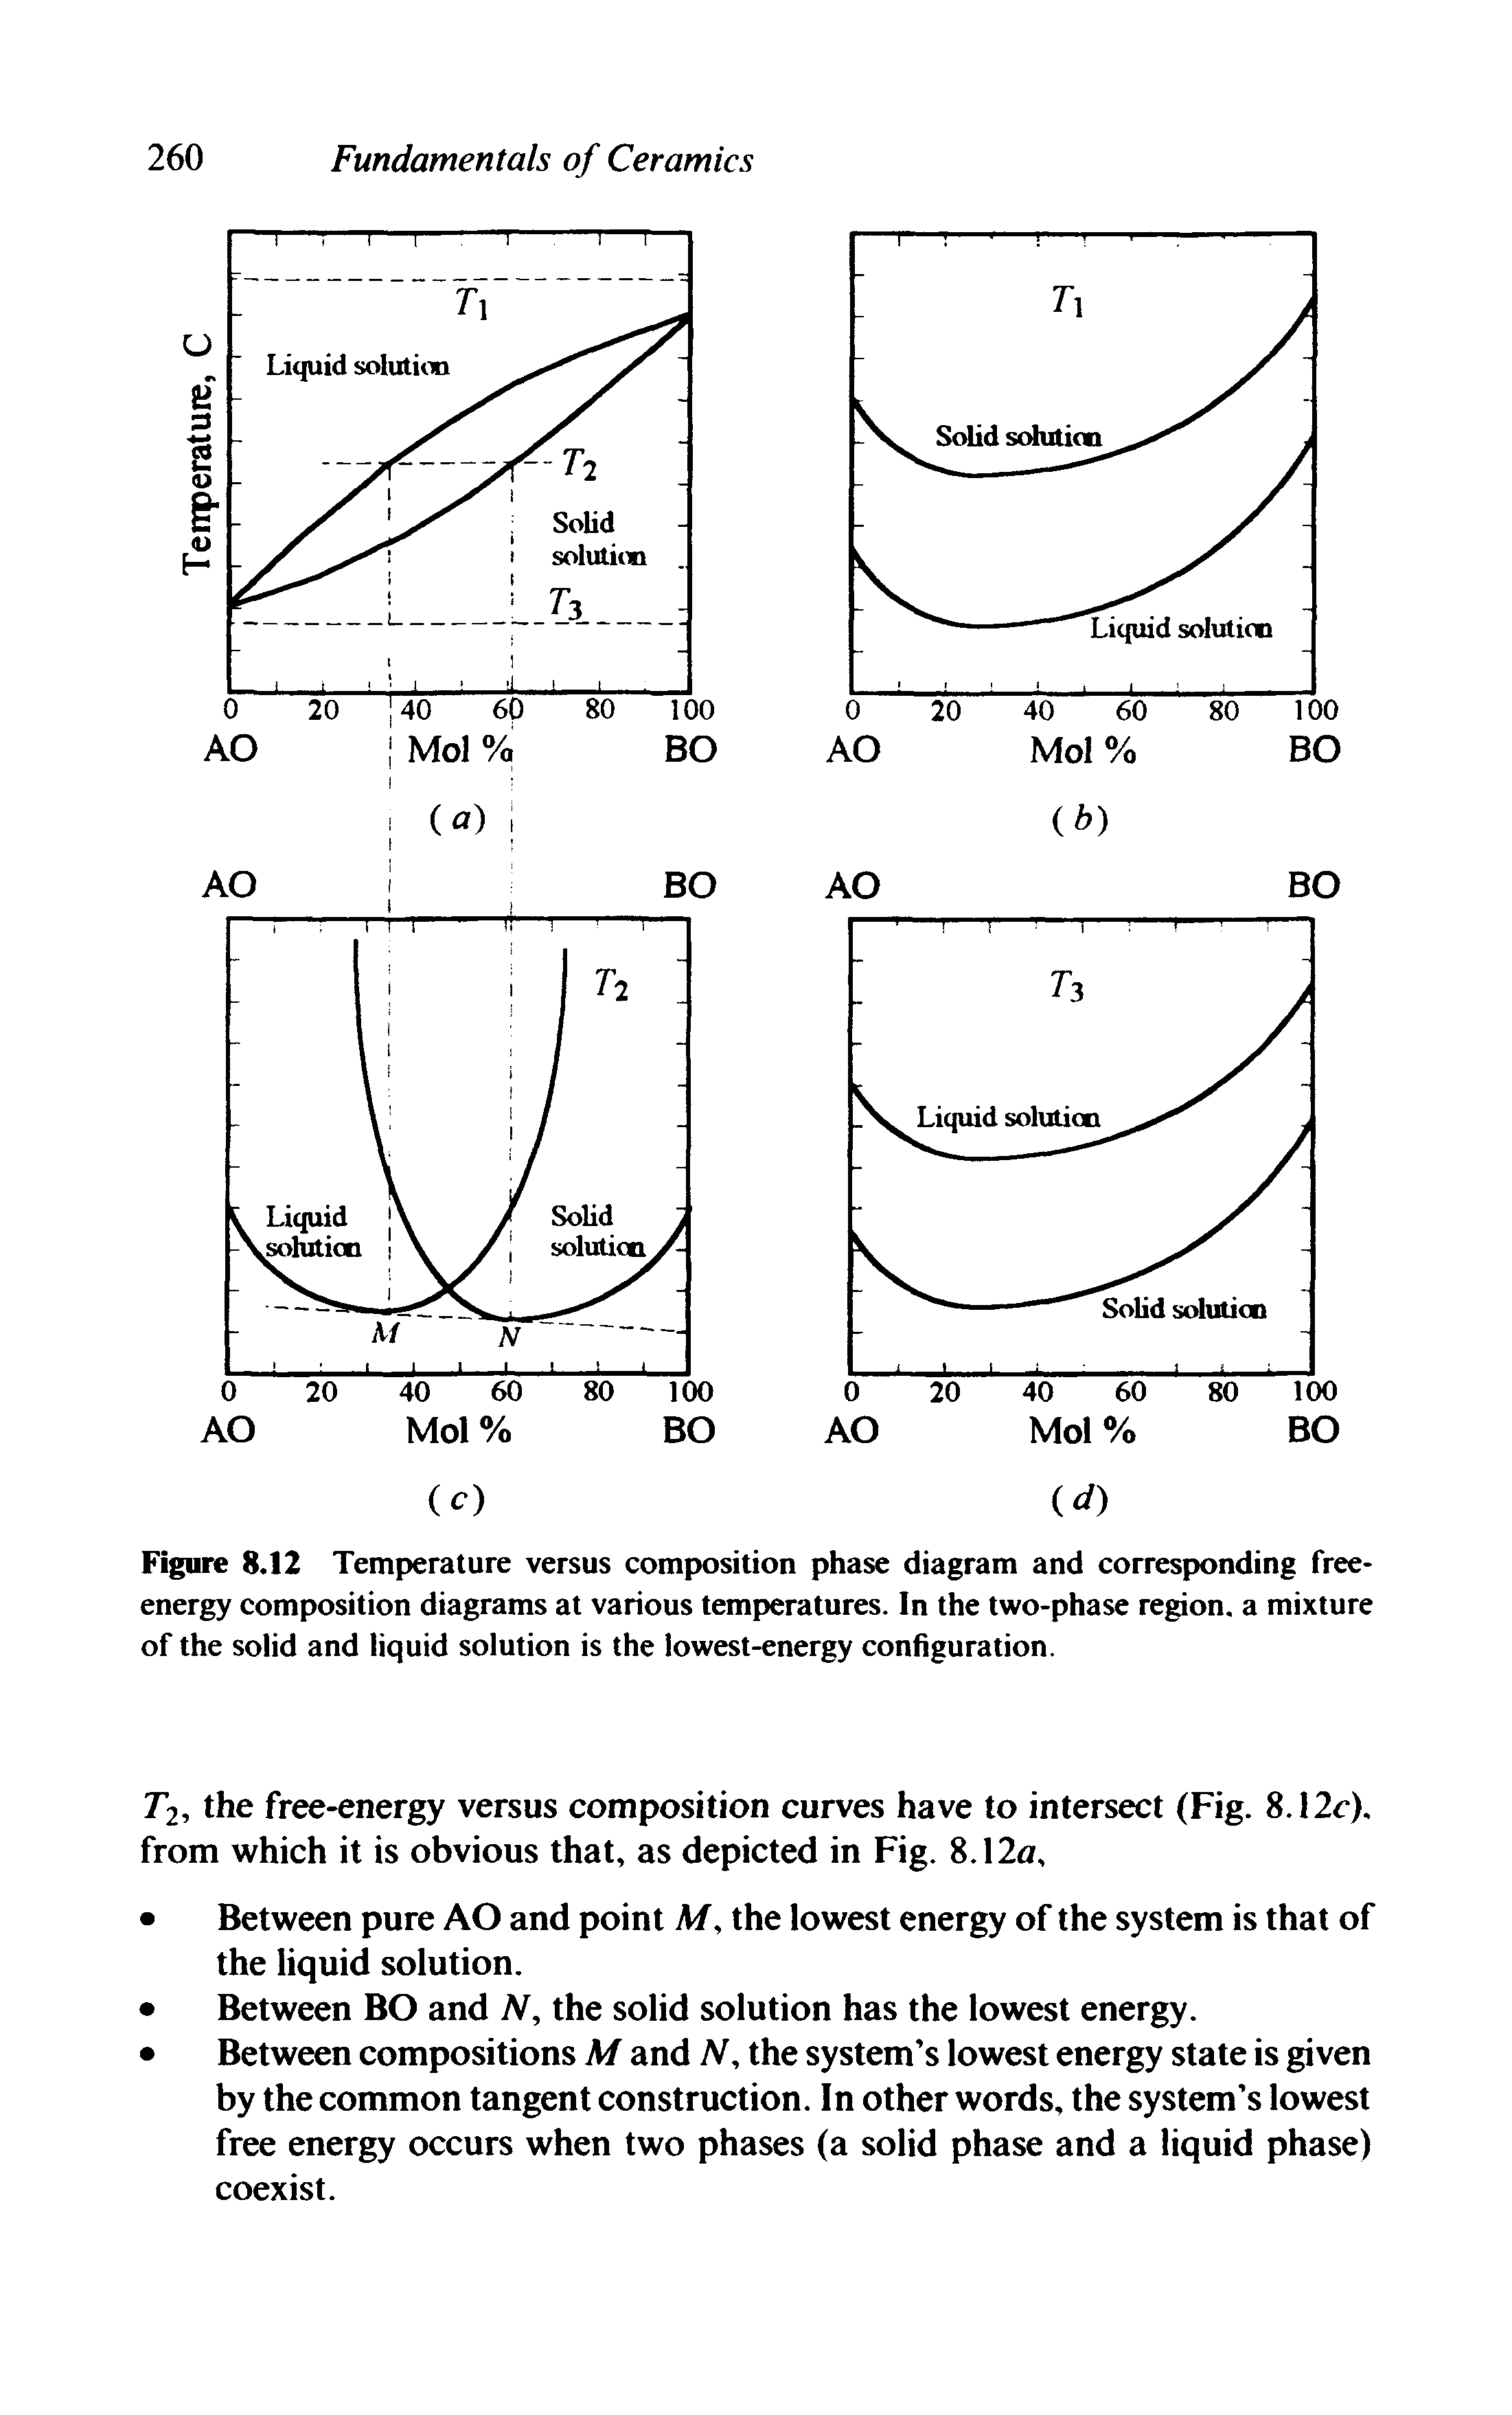 Figure 8.12 Temperature versus composition phase diagram and corresponding free-energy composition diagrams at various temperatures. In the two-phase region, a mixture of the solid and liquid solution is the lowest-energy configuration.